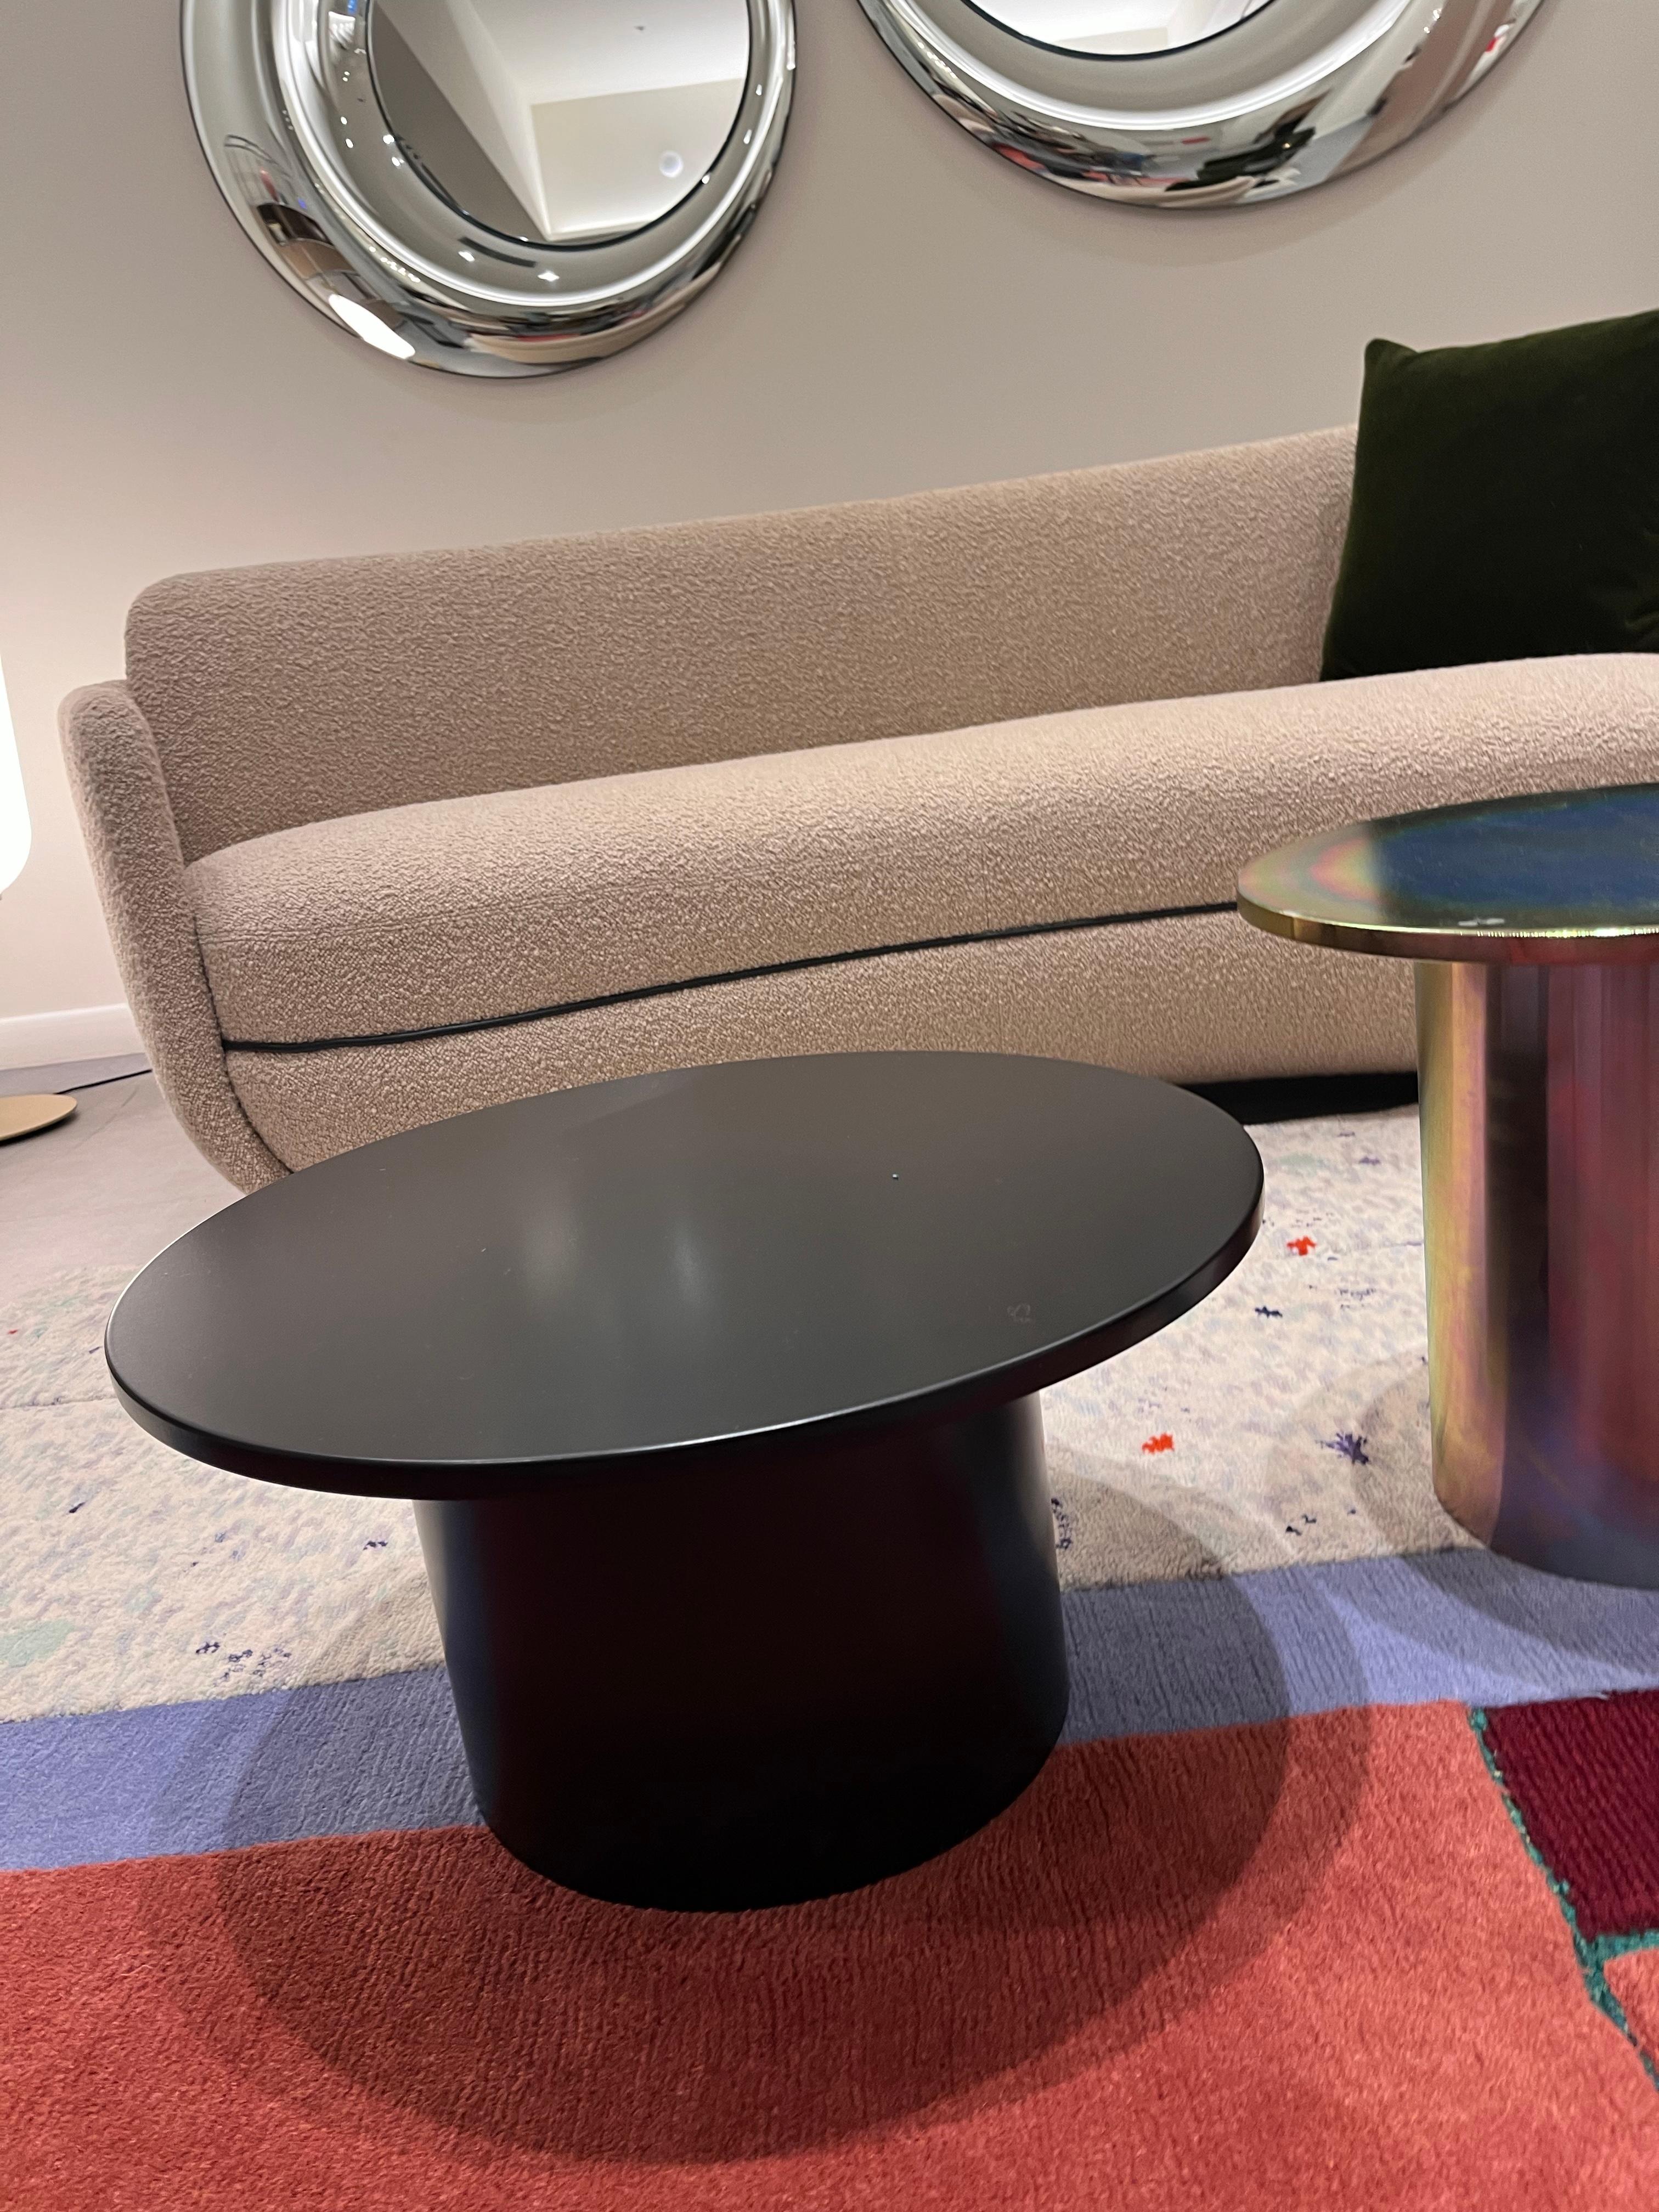 ENOKI COFFEE TABLE JET BLACK POWDER COATED
550x285x324mm

With the smart and playful side table ENOKI, e15 introduces marble for the collection, applying it to novel form. Cleverly toying with material, color and dimensions, the versatile side table